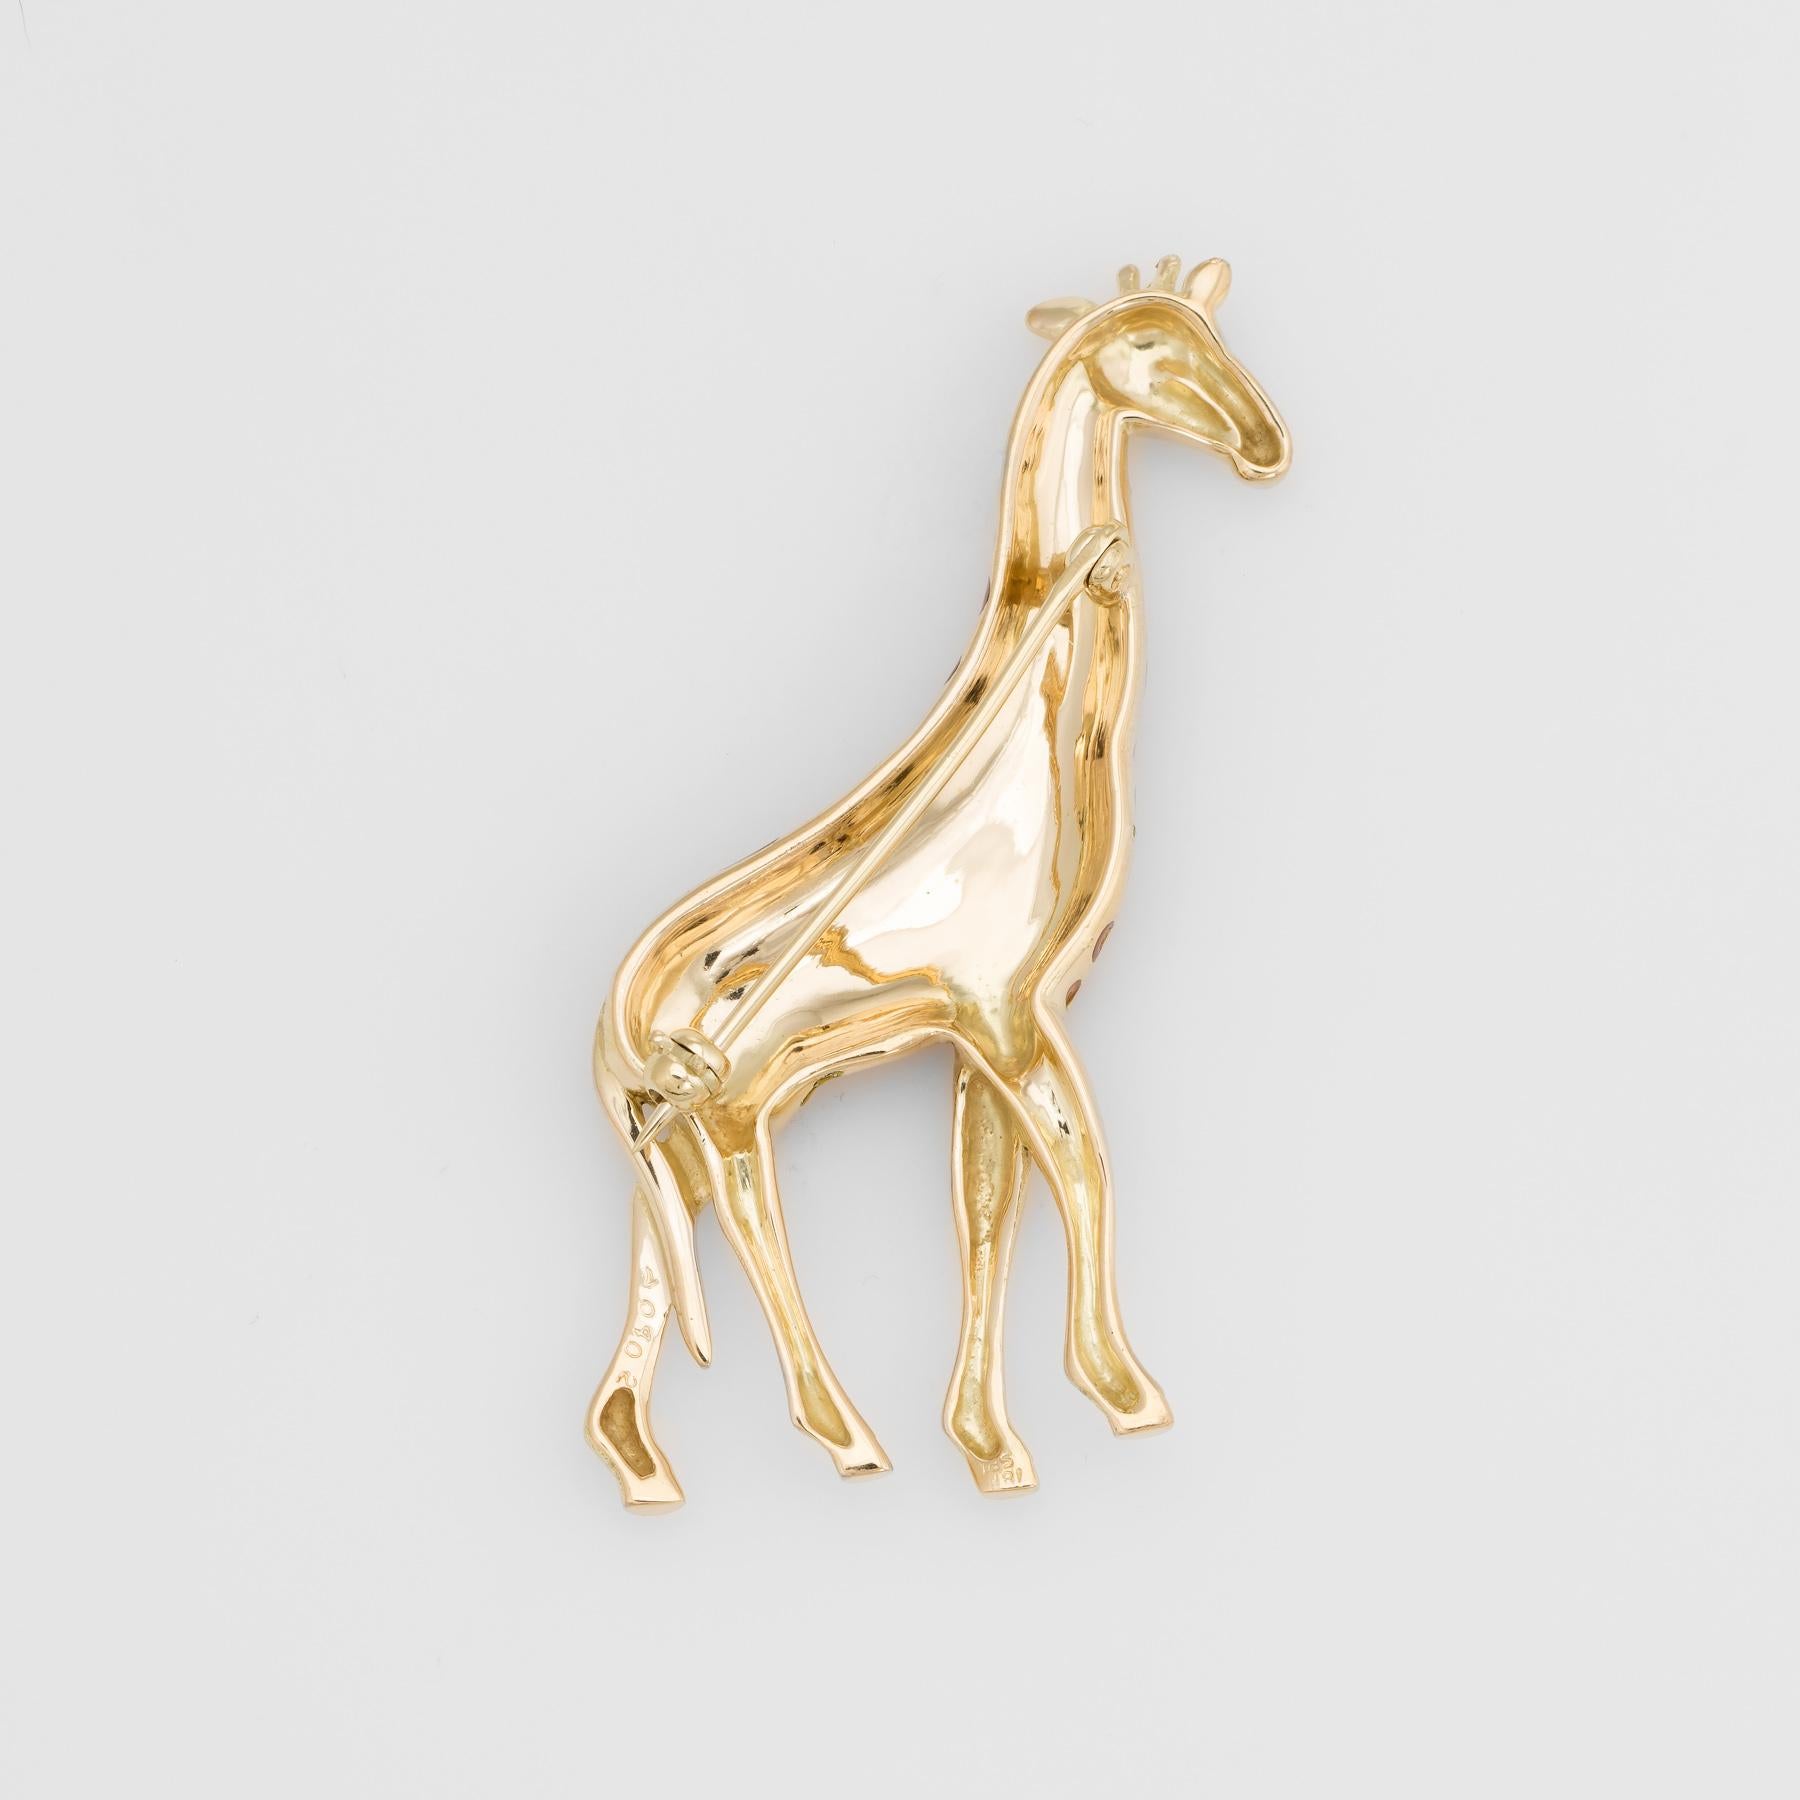 Majestic vintage Giraffe brooch, crafted in 18 karat yellow gold. 

The giraffe features lifelike detail with the spots liberally placed in a naturalistic pattern in brown enamel. The gentle giant would be great worn on a lapel, sleeve or wherever